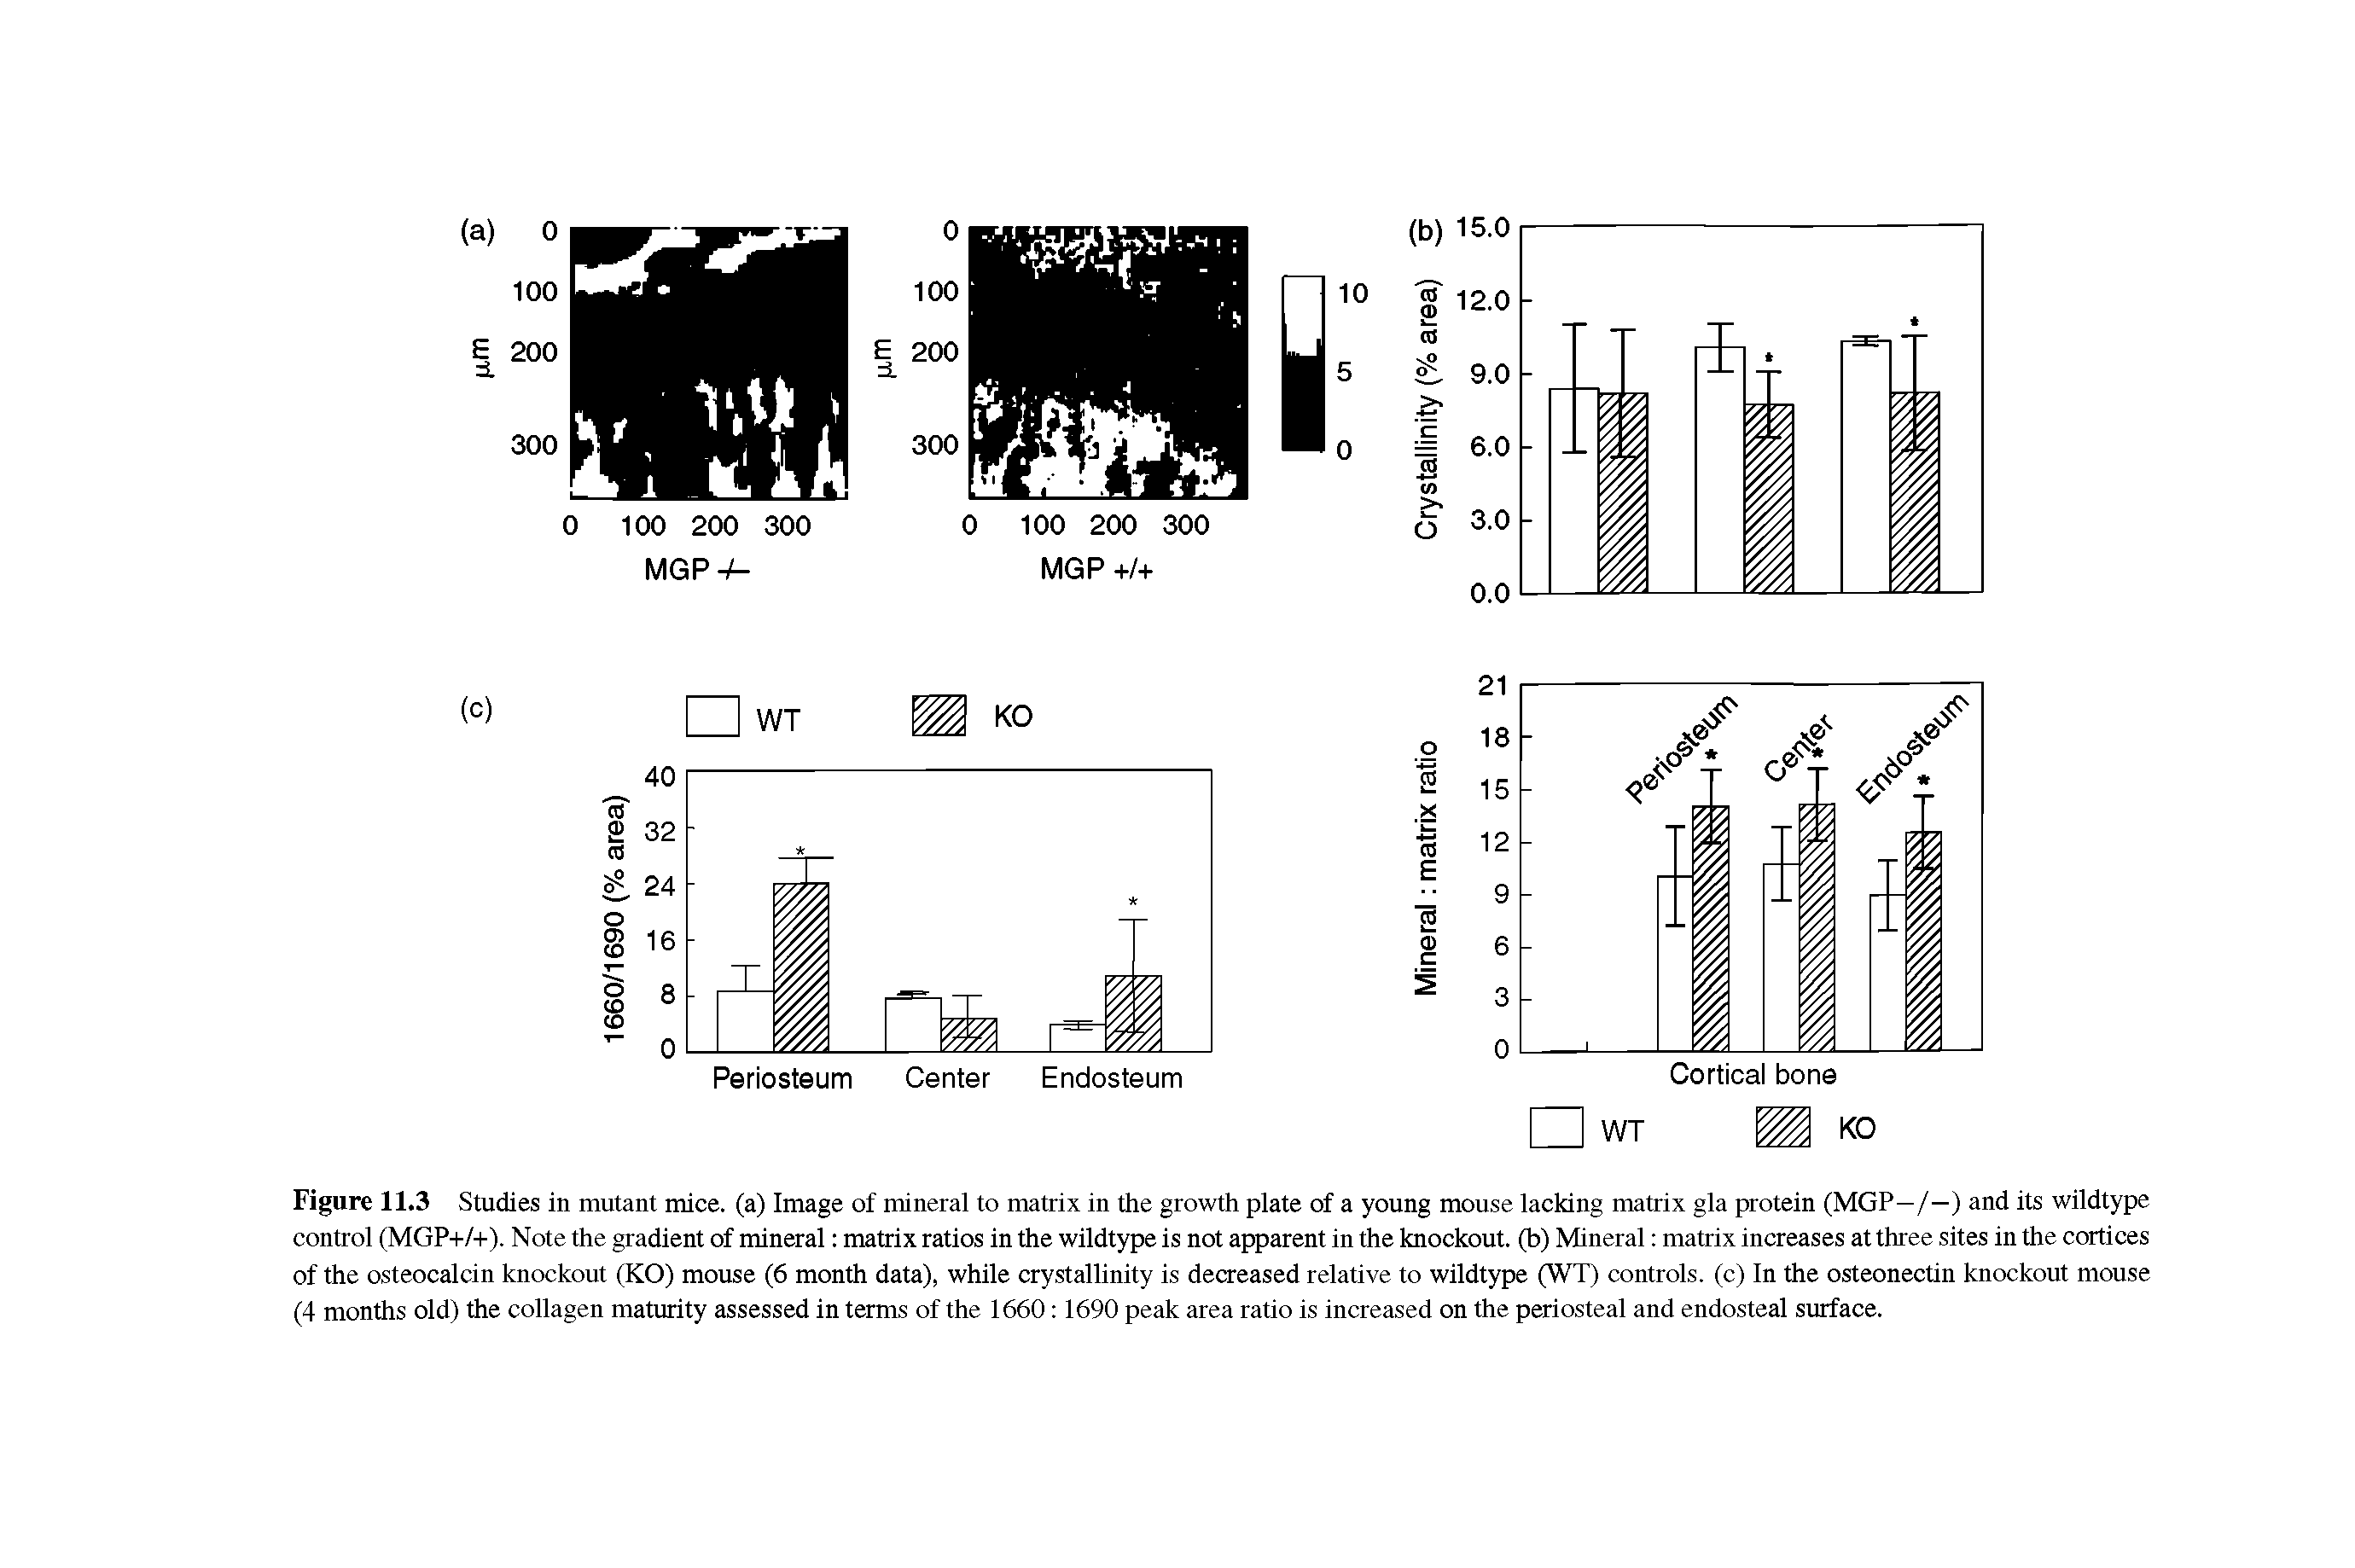 Figure 11.3 Studies in mutant mice, (a) Image of mineral to matrix in the growth plate of a young mouse lacking matrix gla protein (MGP—/—) and its wildtype control (MGP+/+). Note the gradient of mineral matrix ratios in the wildtype is not apparent in the knockout, (b) Mineral matrix increases at three sites in the cortices of the osteocalcin knockout (KO) mouse (6 month data), while crystallinity is decreased relative to wildtype (WT) controls, (c) In the osteonectin knockout mouse (4 months old) the collagen maturity assessed in terms of the 1660 1690 peak area ratio is increased on the periosteal and endosteal surface.